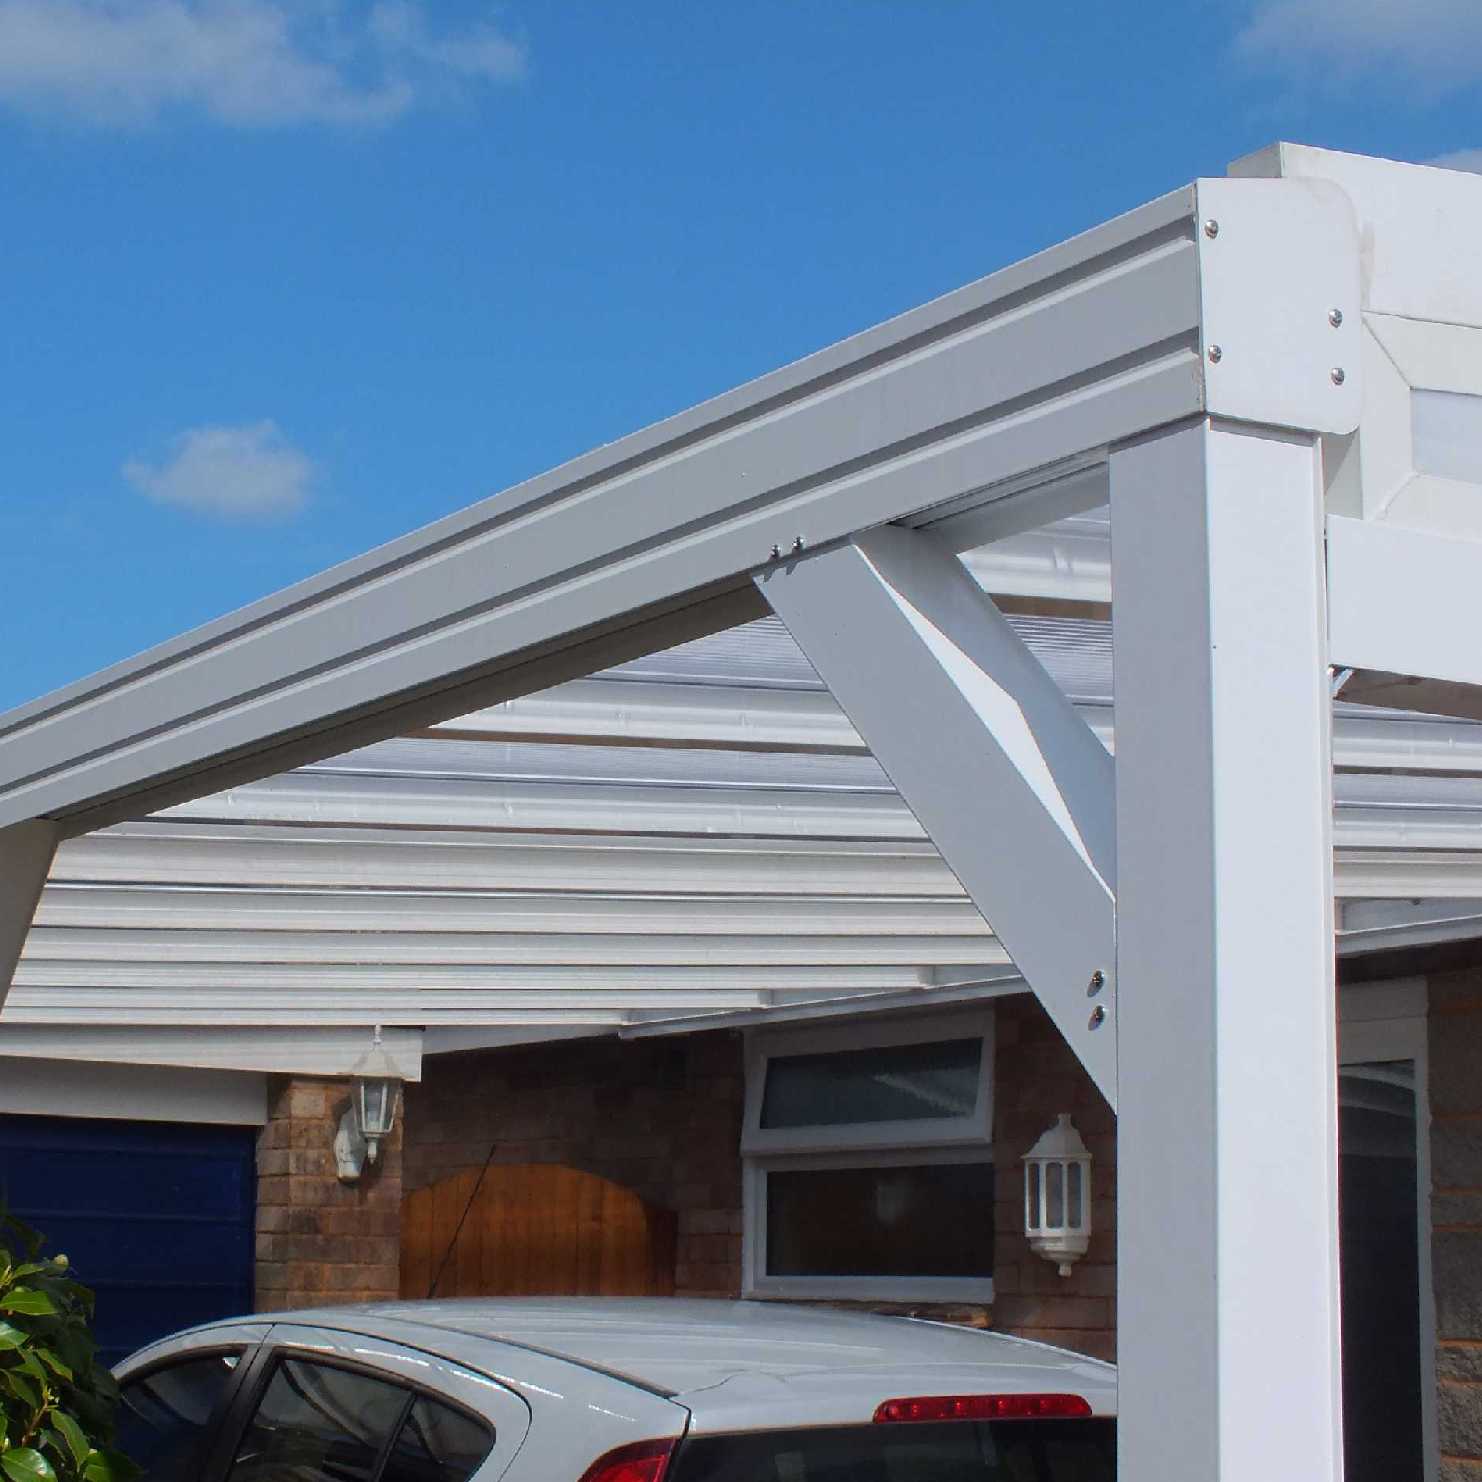 Buy Omega Smart Lean-To Canopy, White with 16mm Polycarbonate Glazing - 11.4m (W) x 3.5m (P), (5) Supporting Posts online today